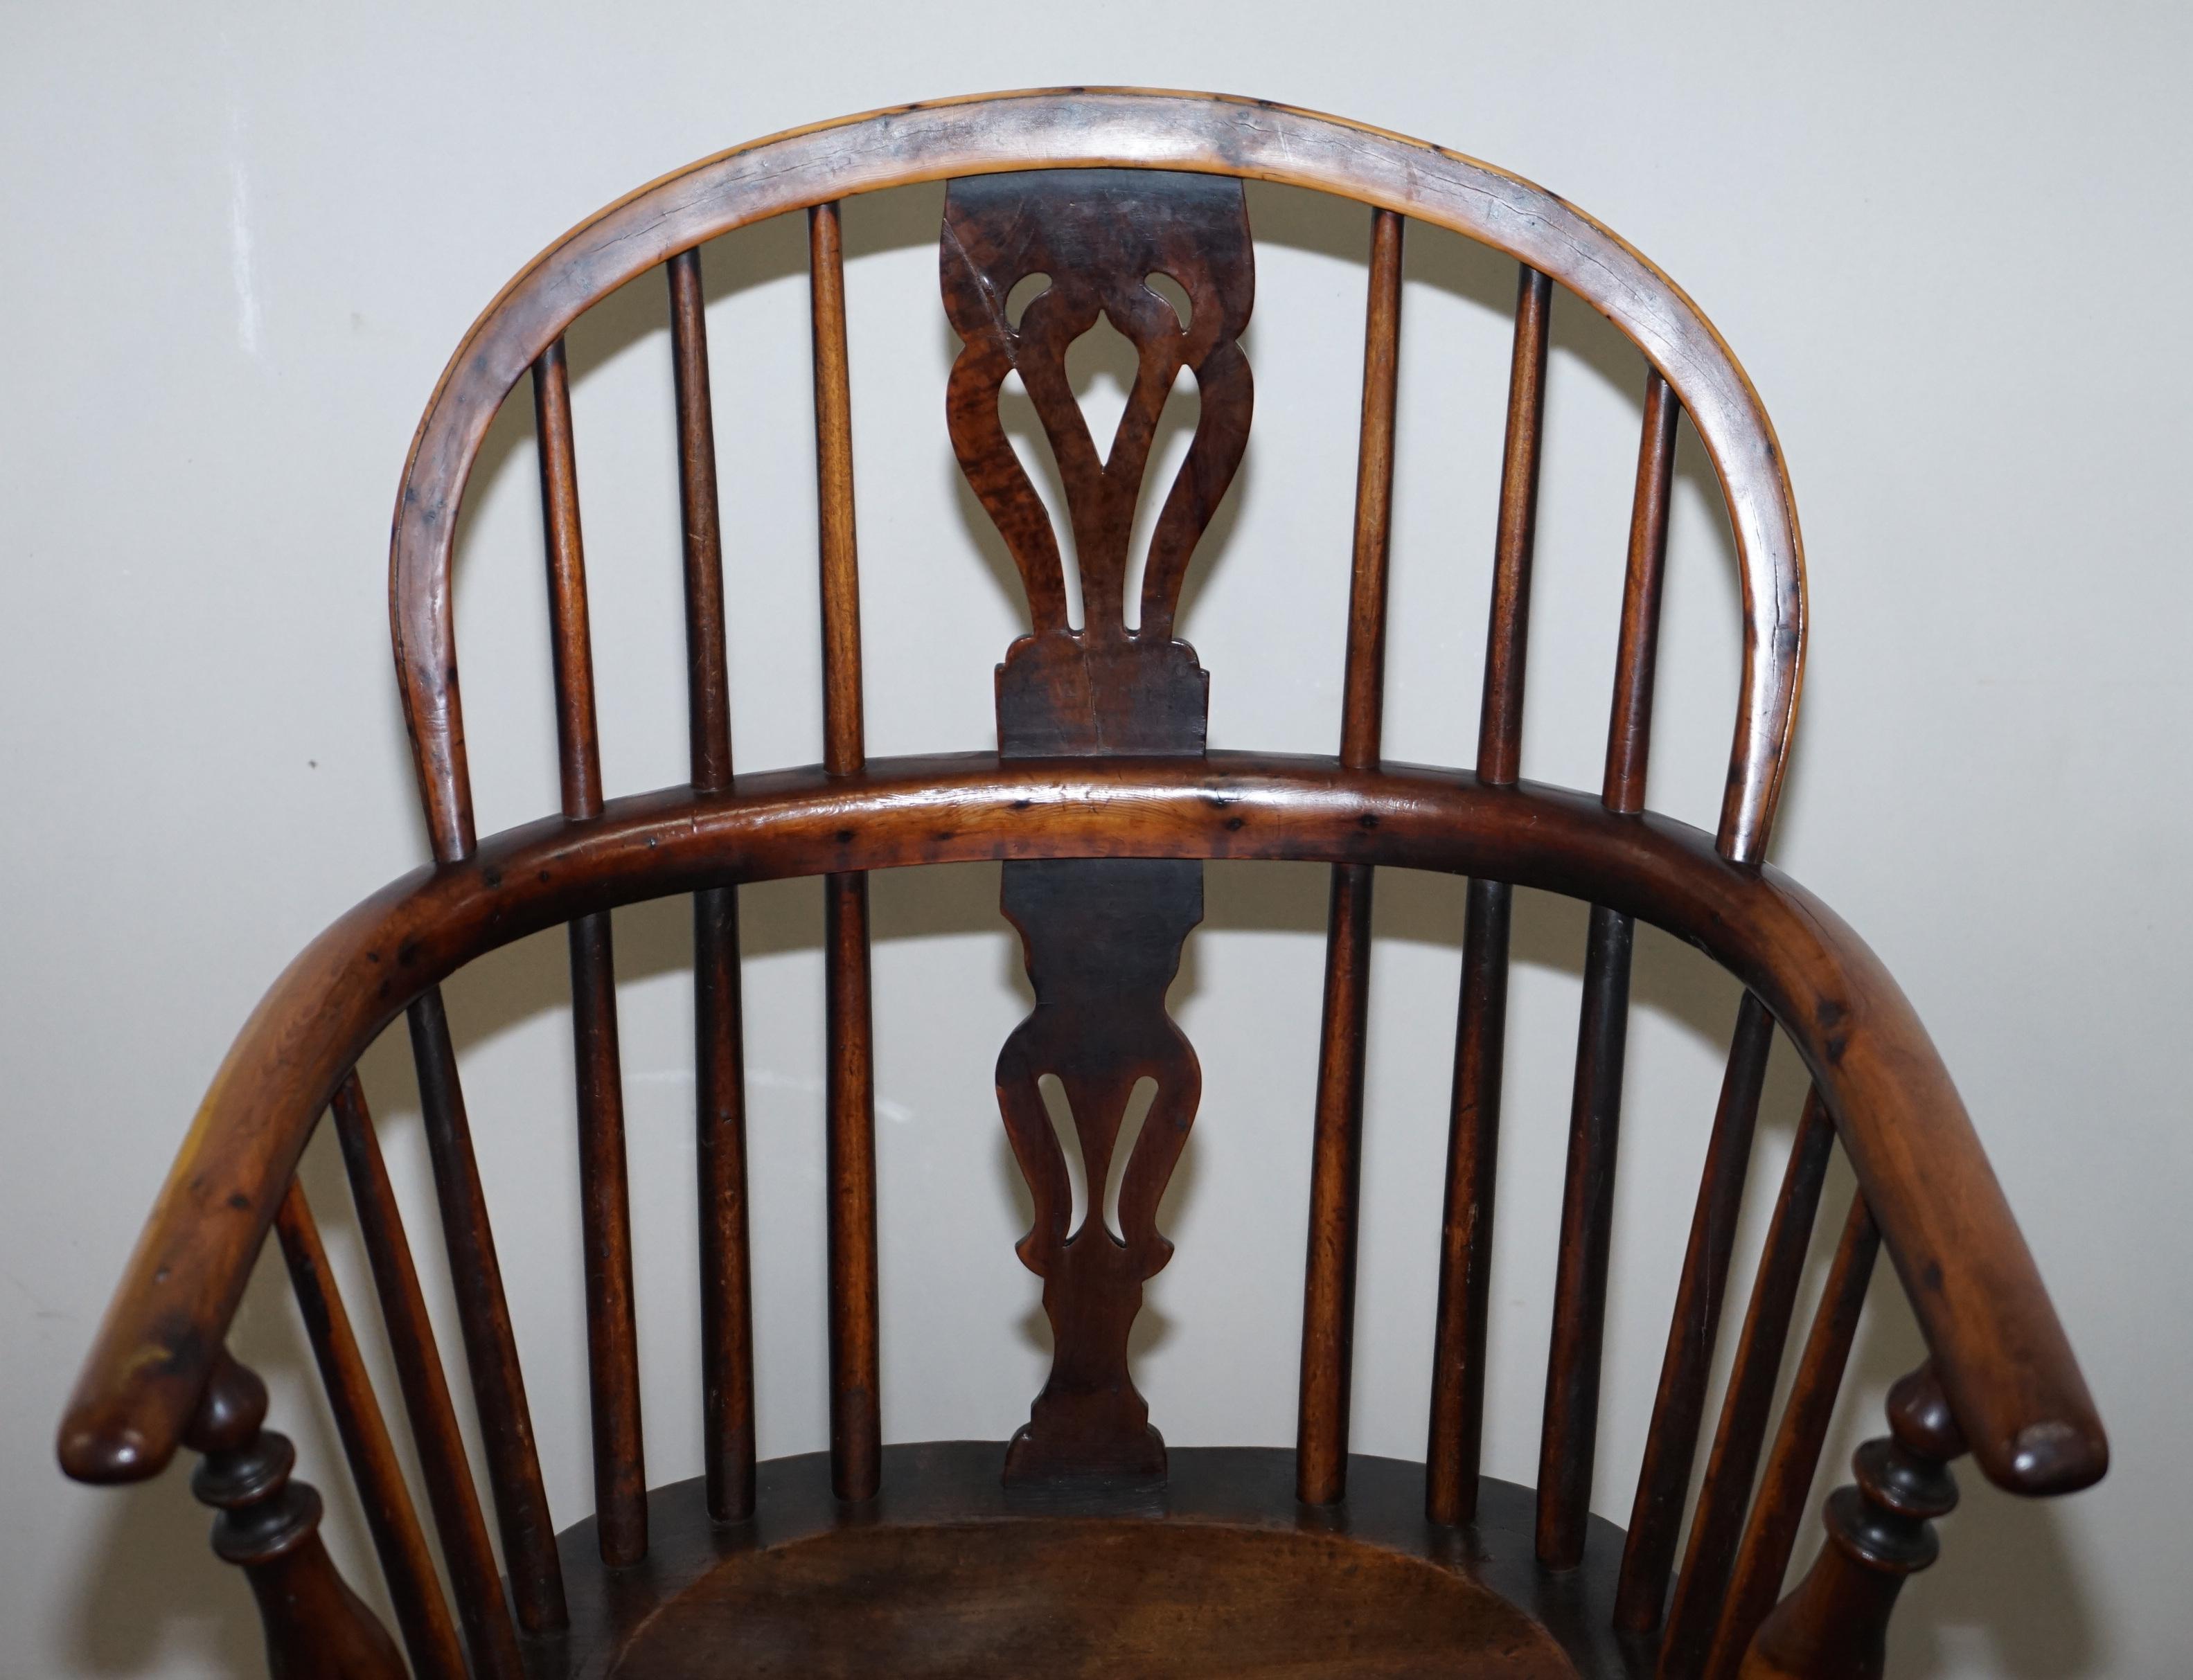 High Victorian 1 of 6 Burr Yew Wood and Elm Windsor Armchairs circa 1860 English Country House